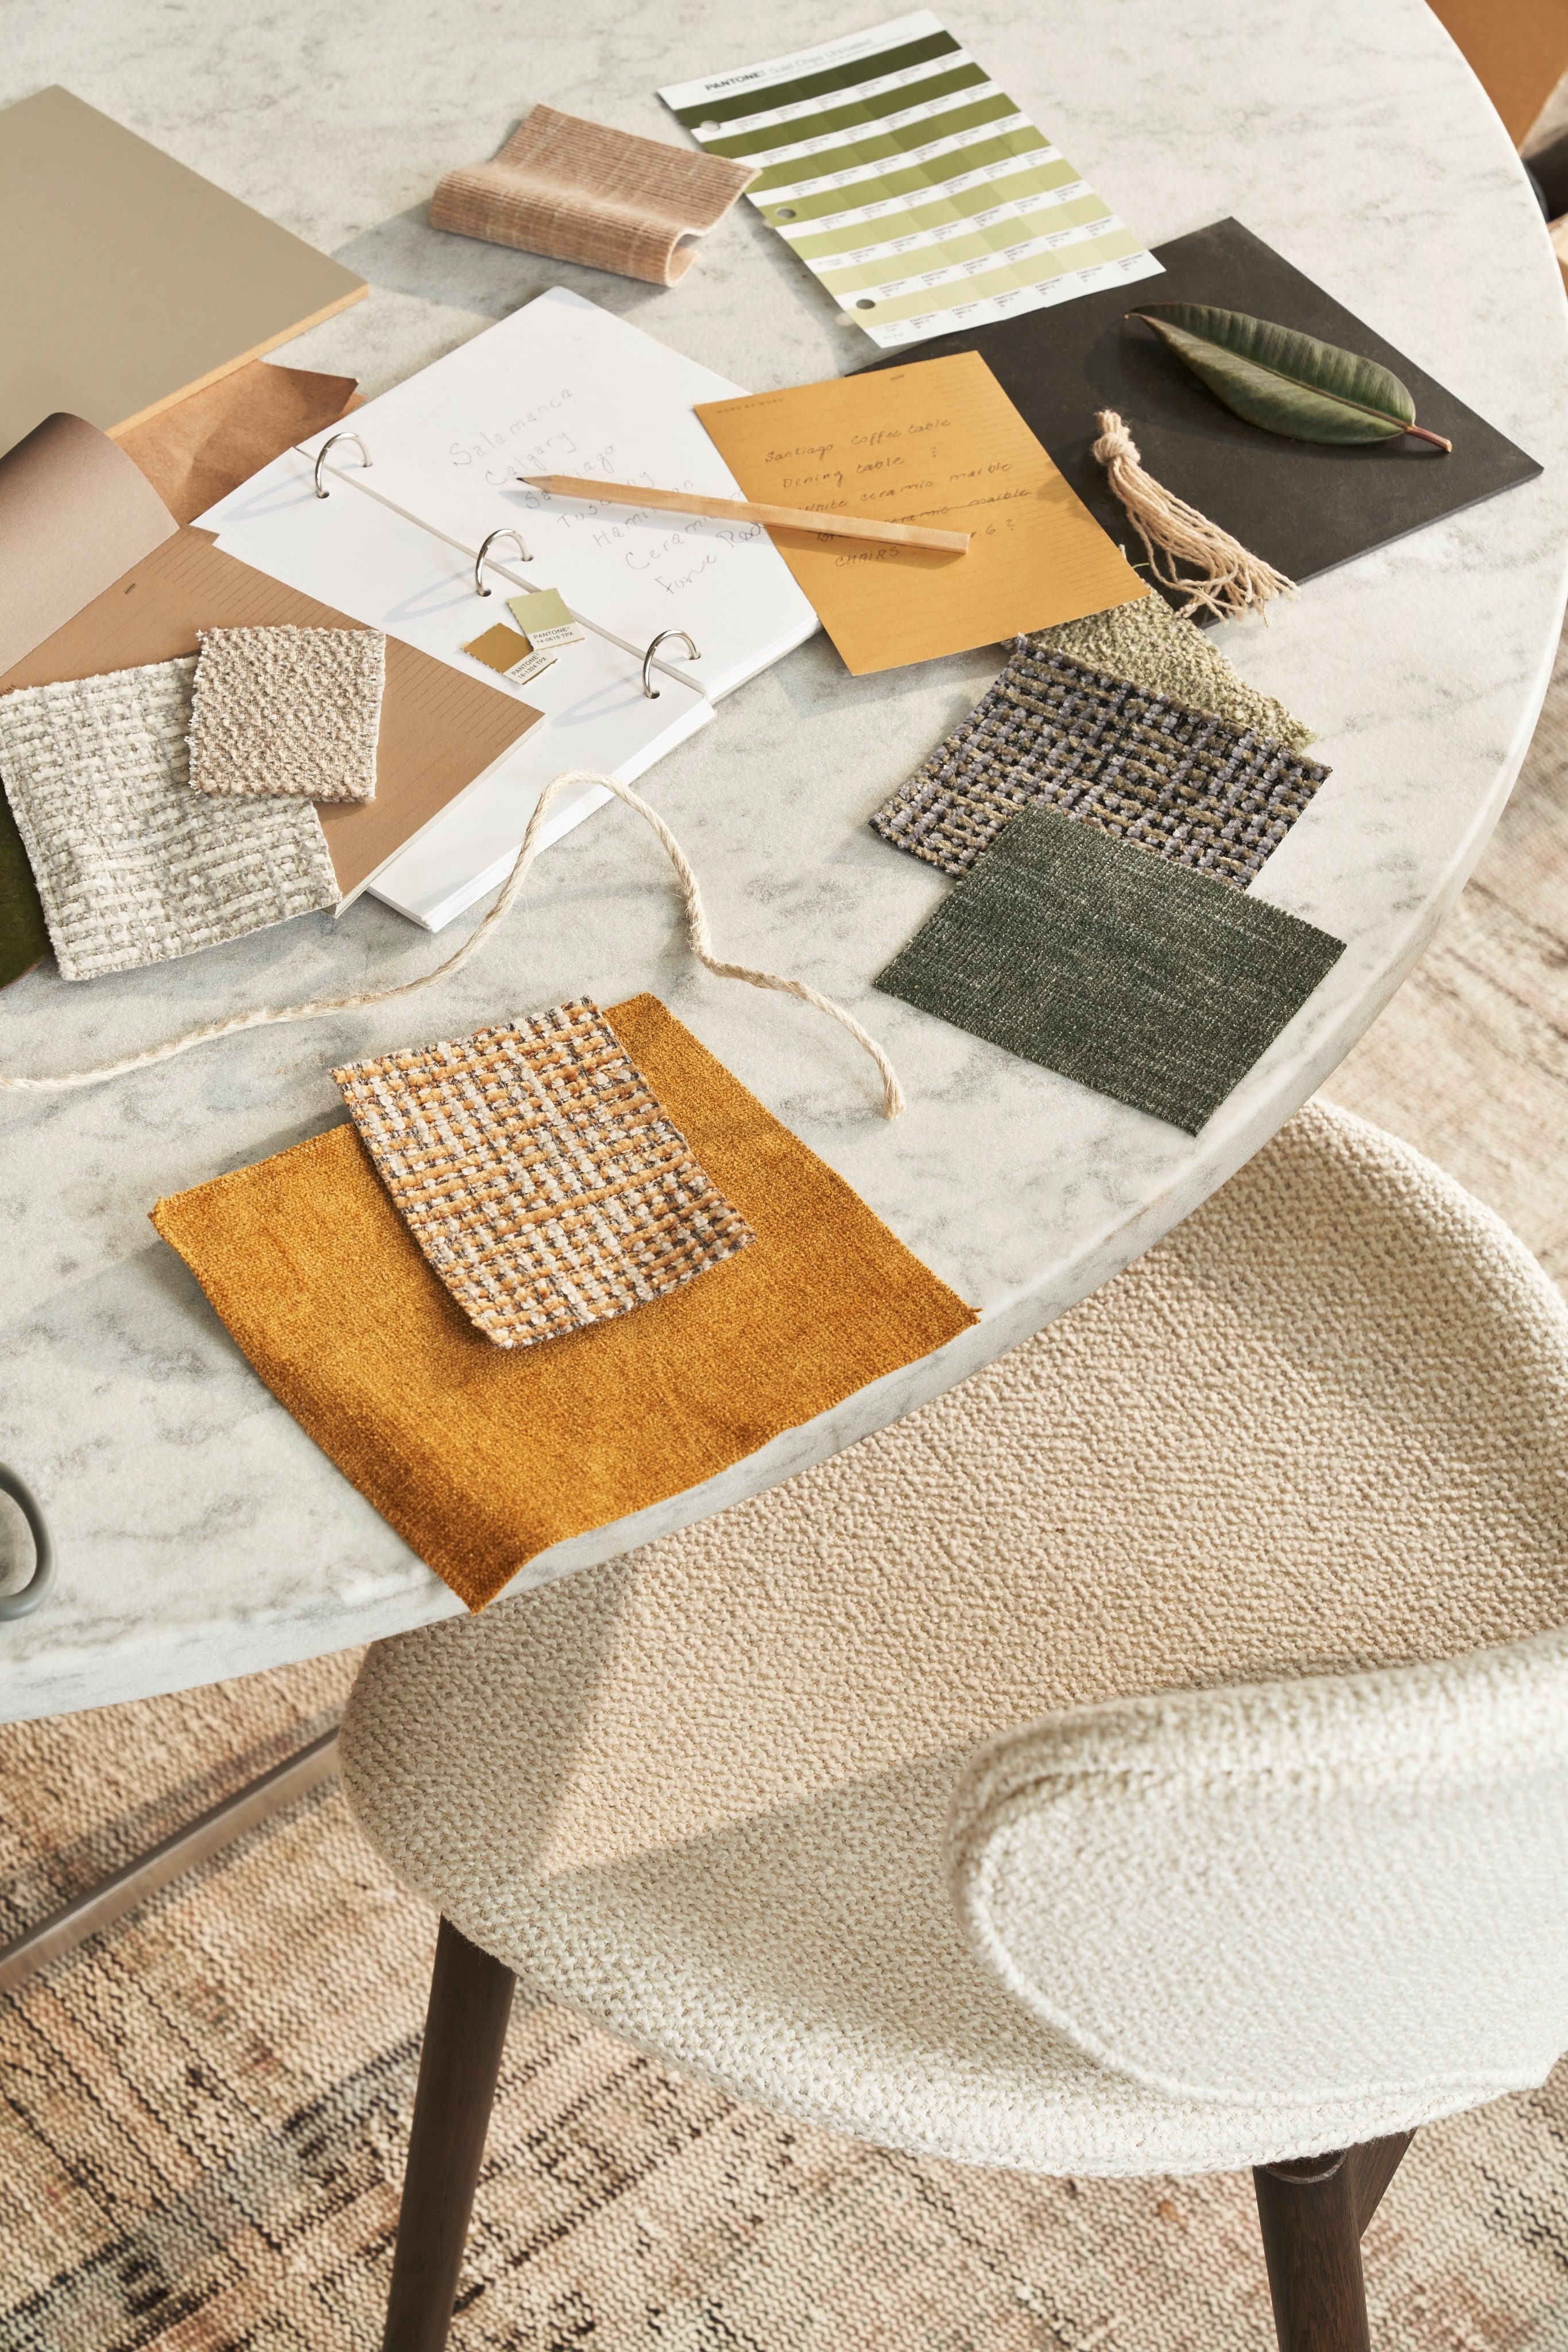 Marble table with fabric swatches, note cards, and pencil in natural tones.